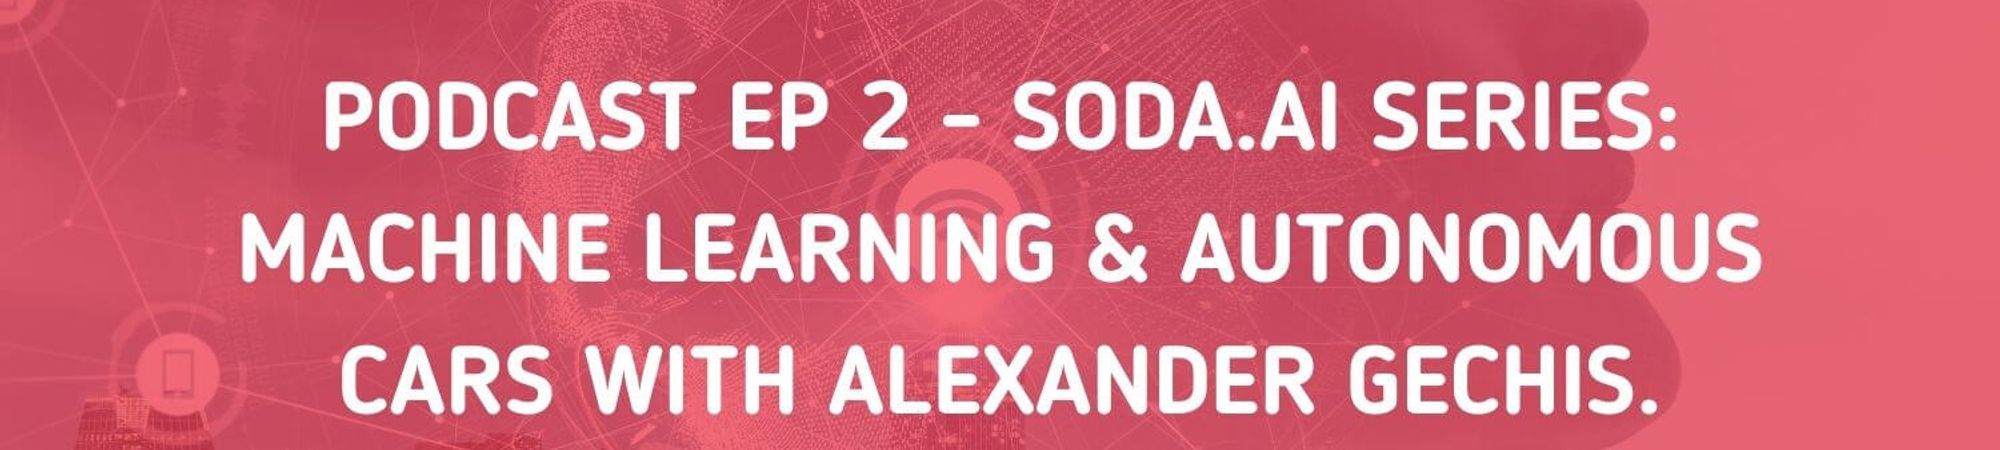 Podcast Episode 2 Sodaaiseries Machine Learning Autonomous Cars With Alexander Gechis